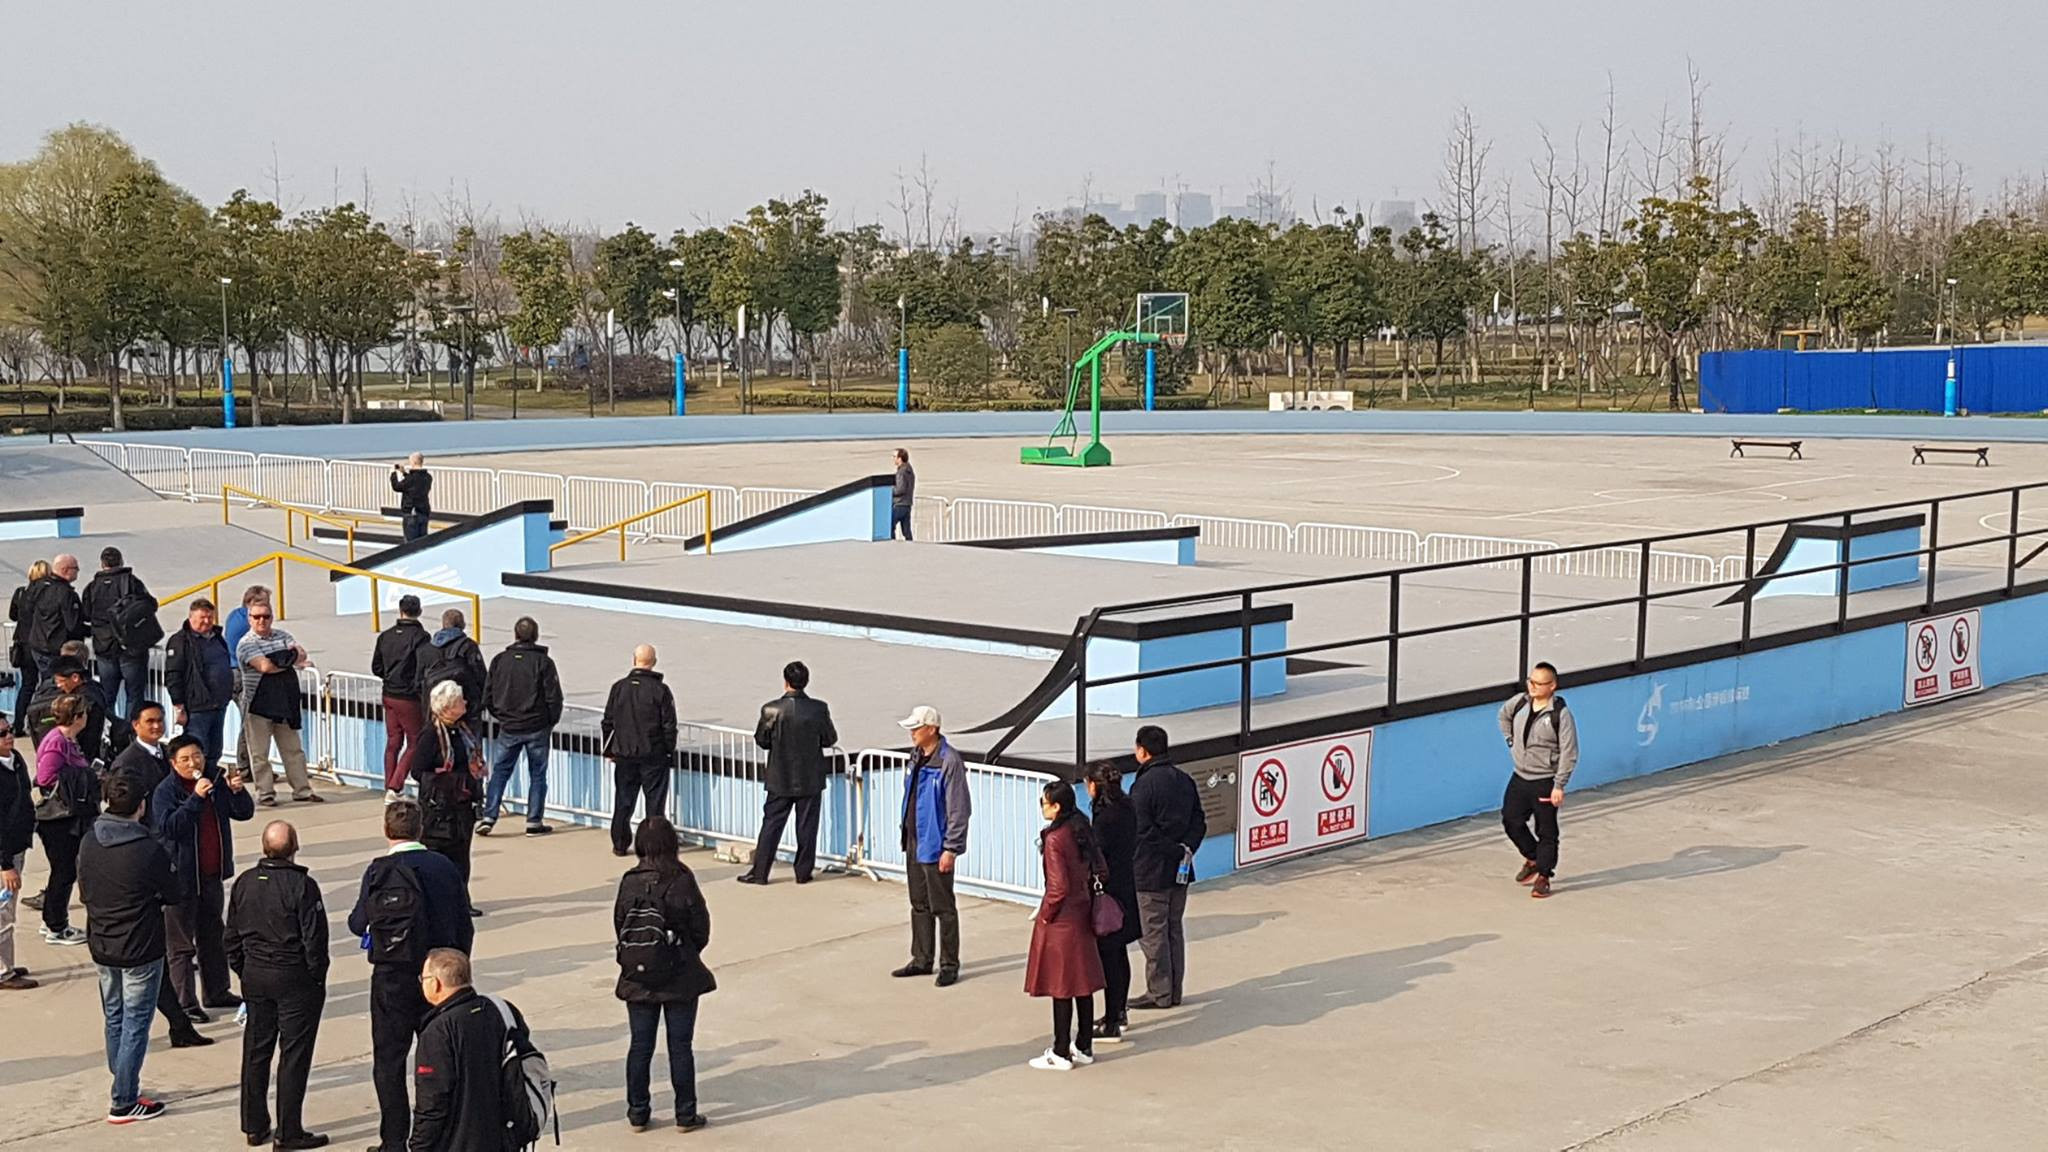 The competition venue is located close to the the SportsLab in the Chinese city, which hosted skateboarding events at the 2014 Youth Olympic Games ©Facebook